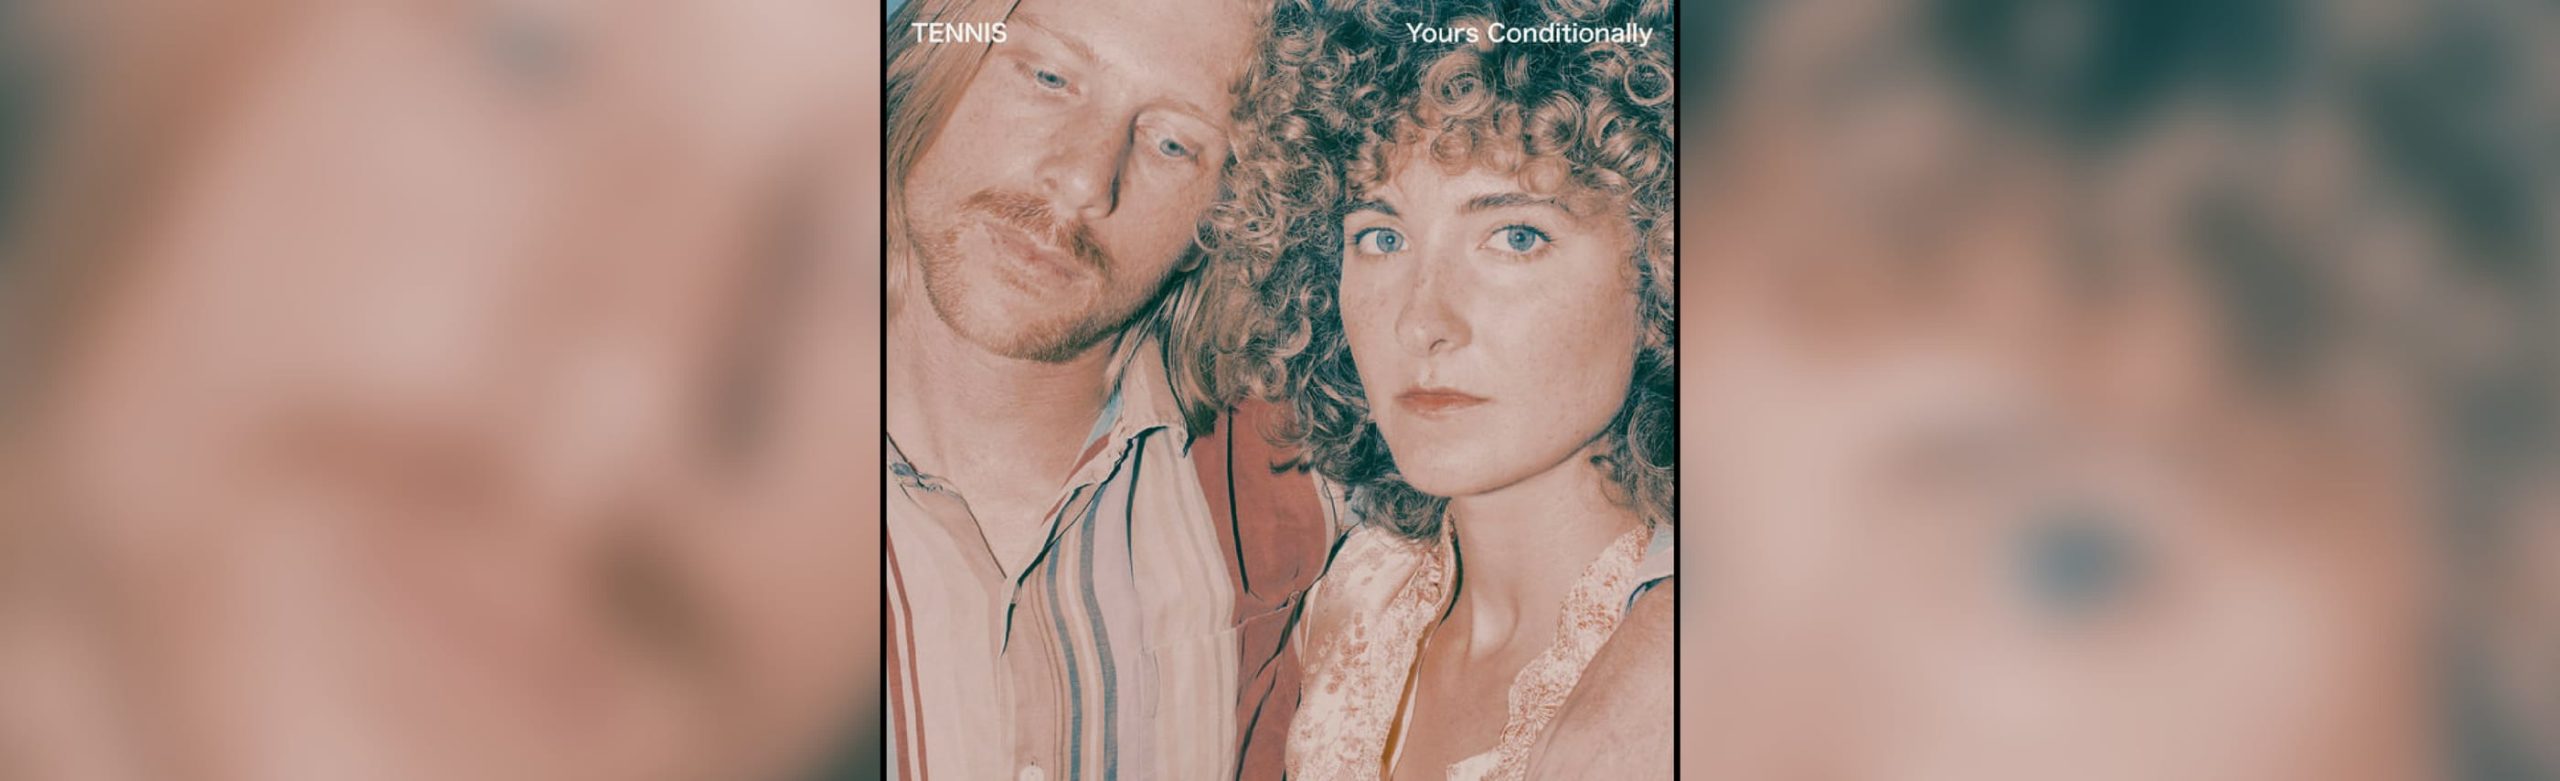 GIVEAWAY: Tennis Vinyl of “Yours Conditionally” Image